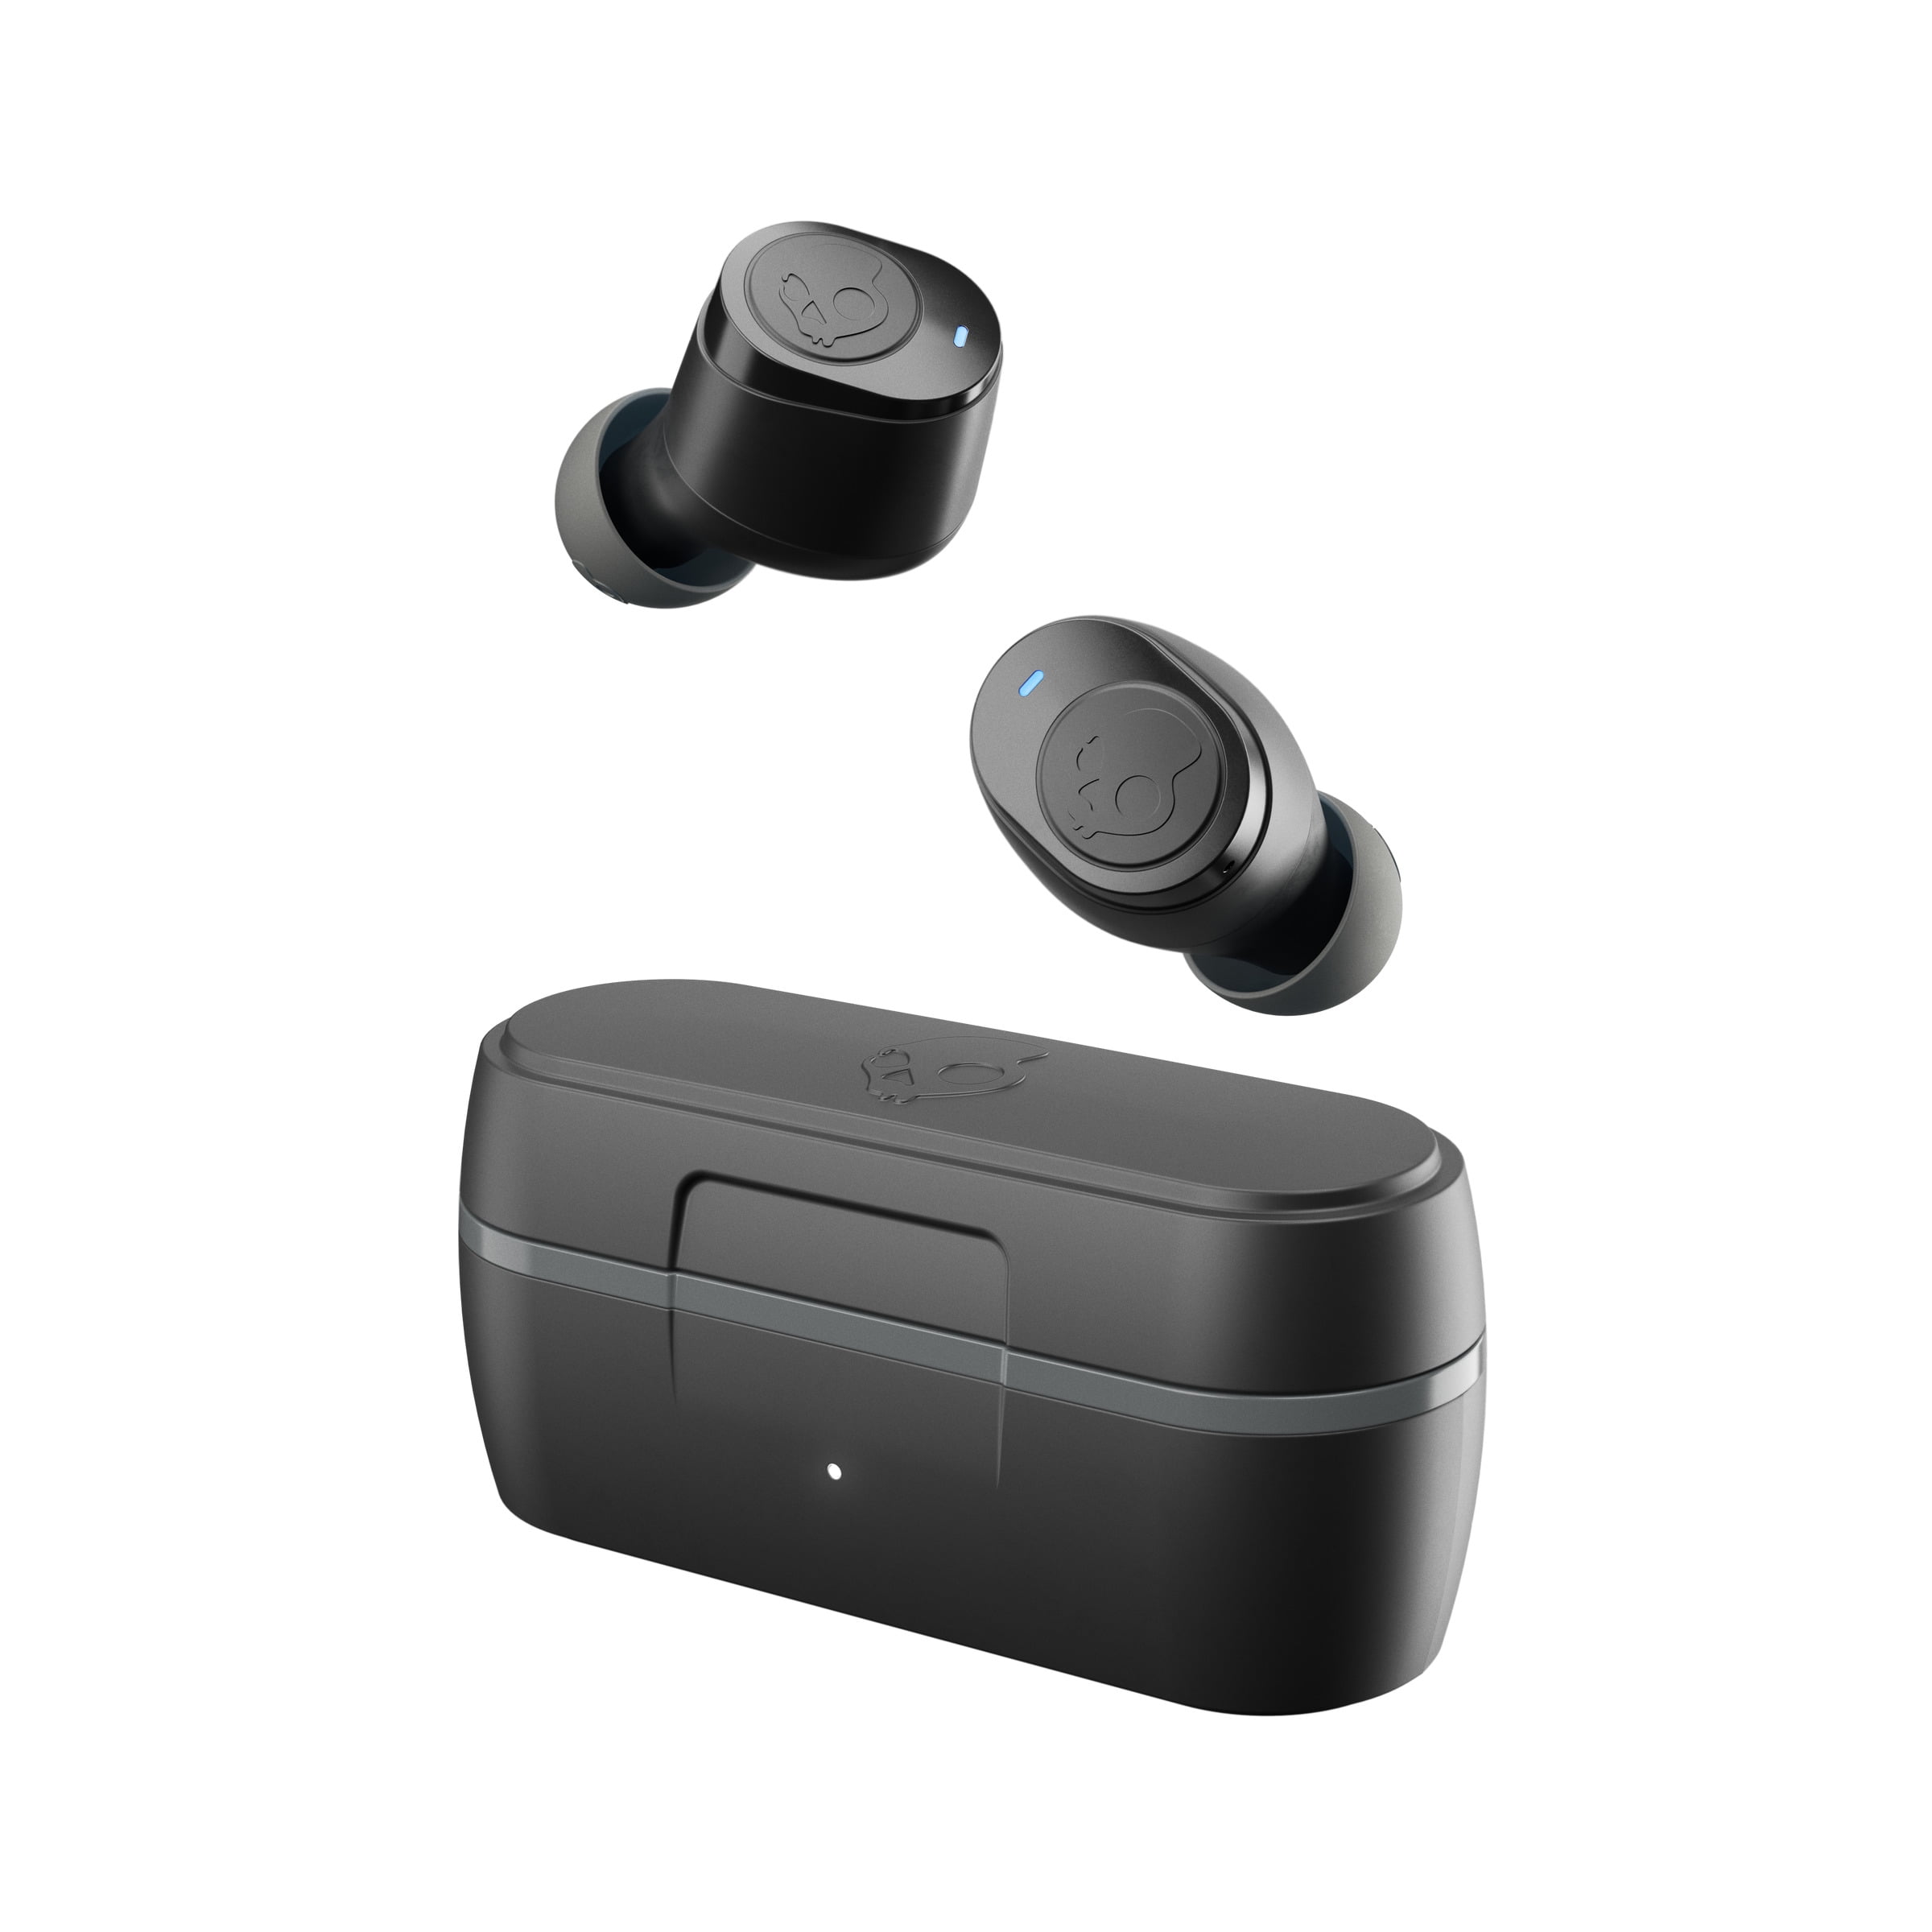 Skullcandy Totally Wireless Essential Reviews